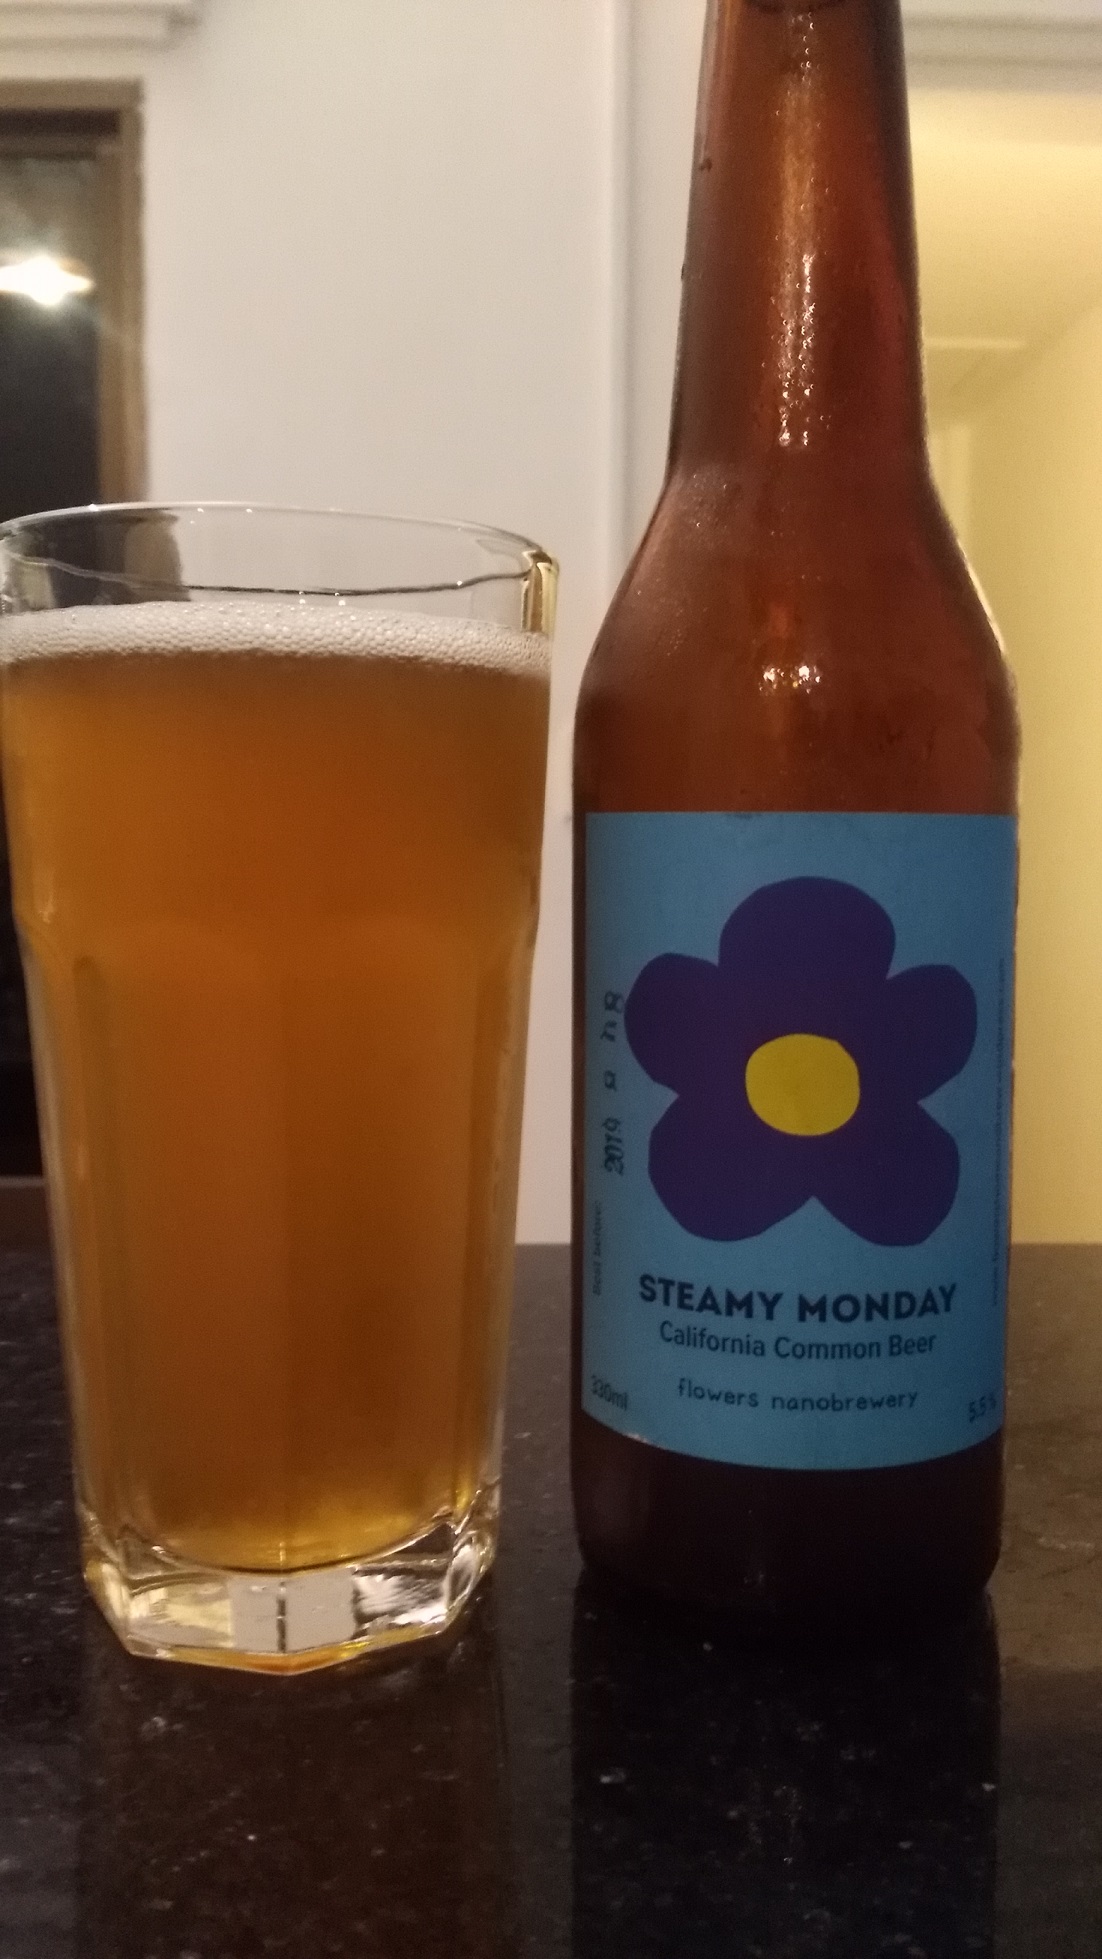 Steamy Monday - California Common Beer - Flowers Nanobrewery